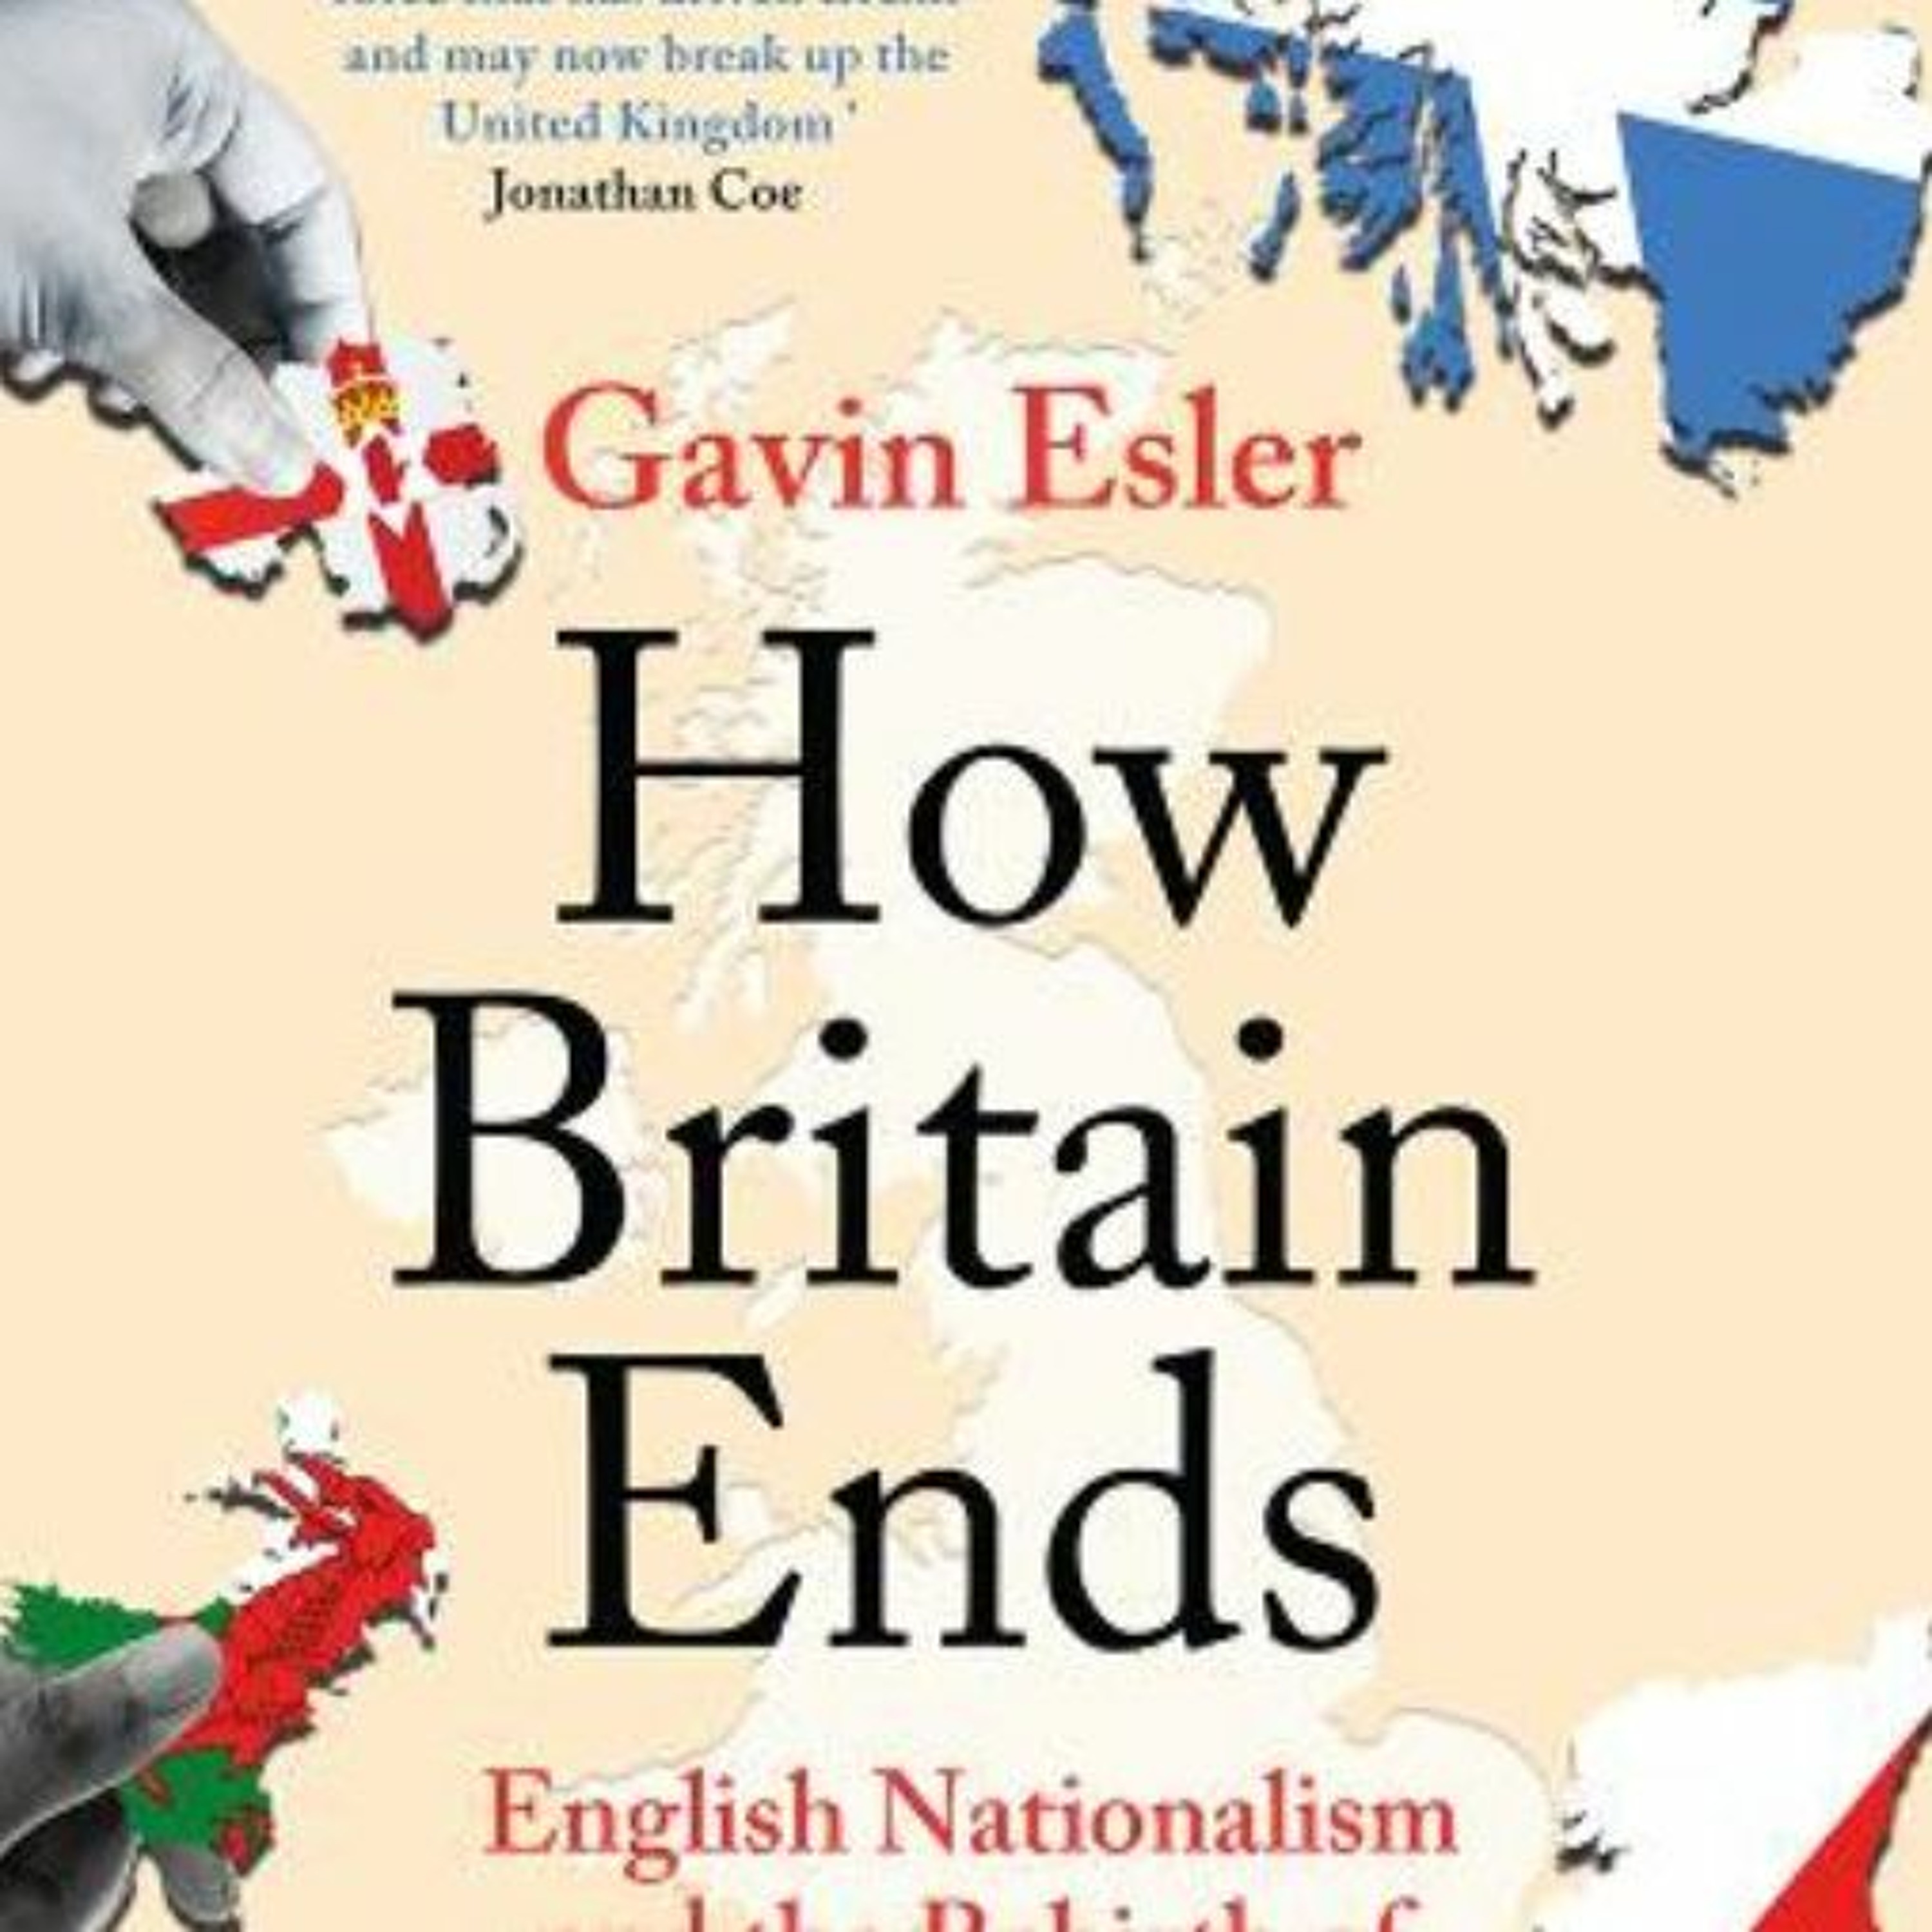 Gavin Esler on How (and Why) Britain Will End